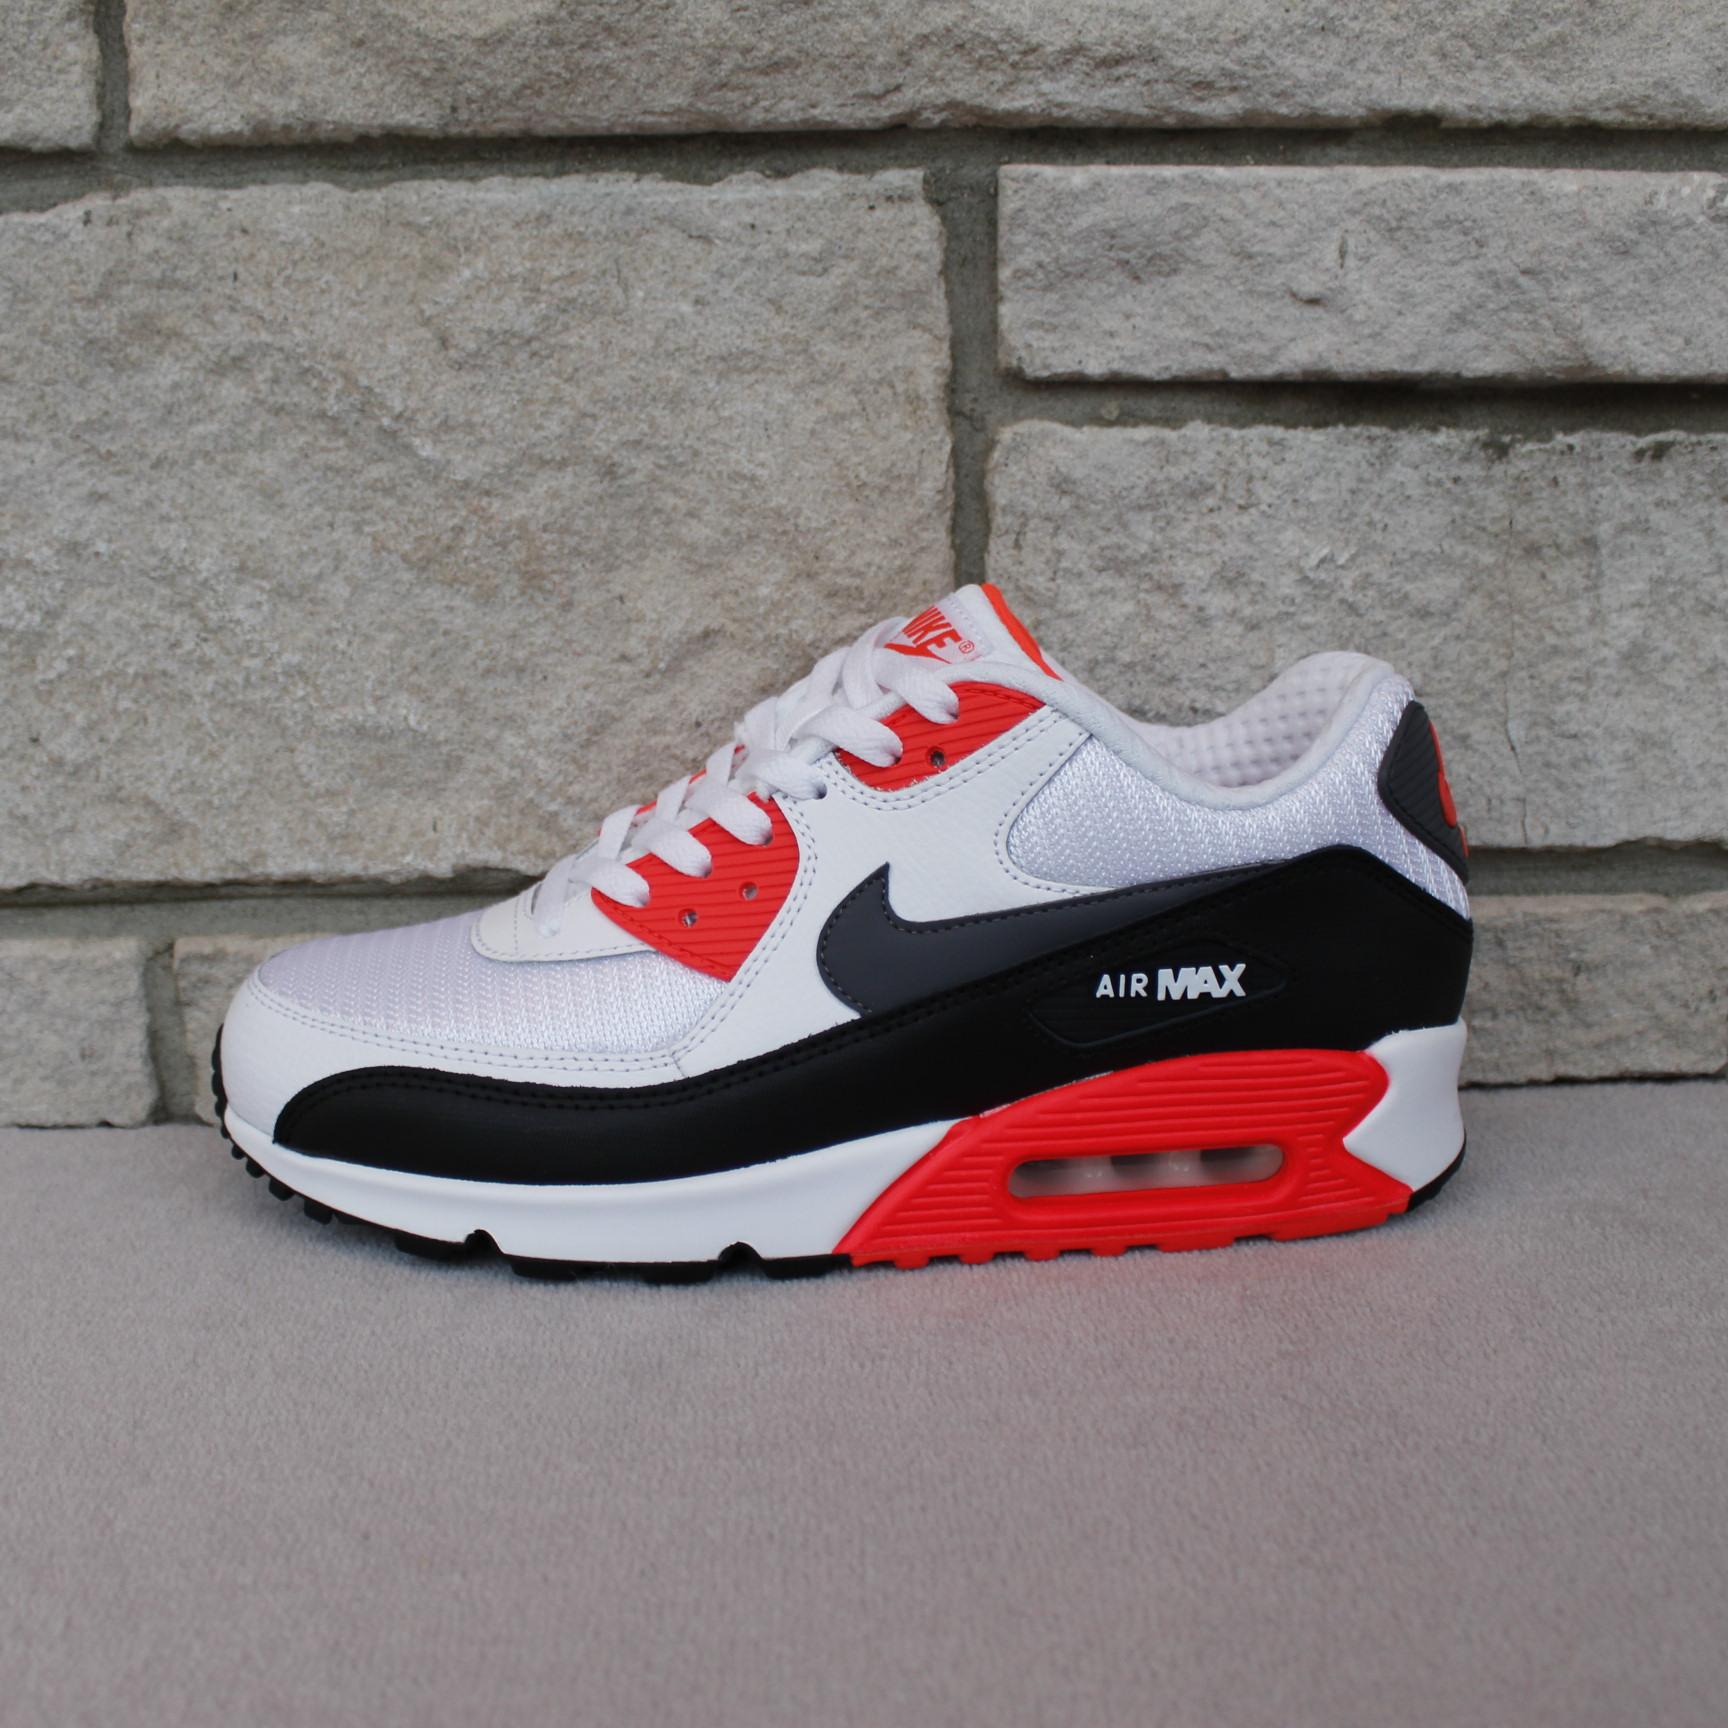 A+S on Twitter: "2015.10.1 tue. in store NIKE MAX 90 ESSENTIAL / 26.0 - #A_and_S #nike #airmax90essential http://t.co/LZL3YwwfyD" / Twitter